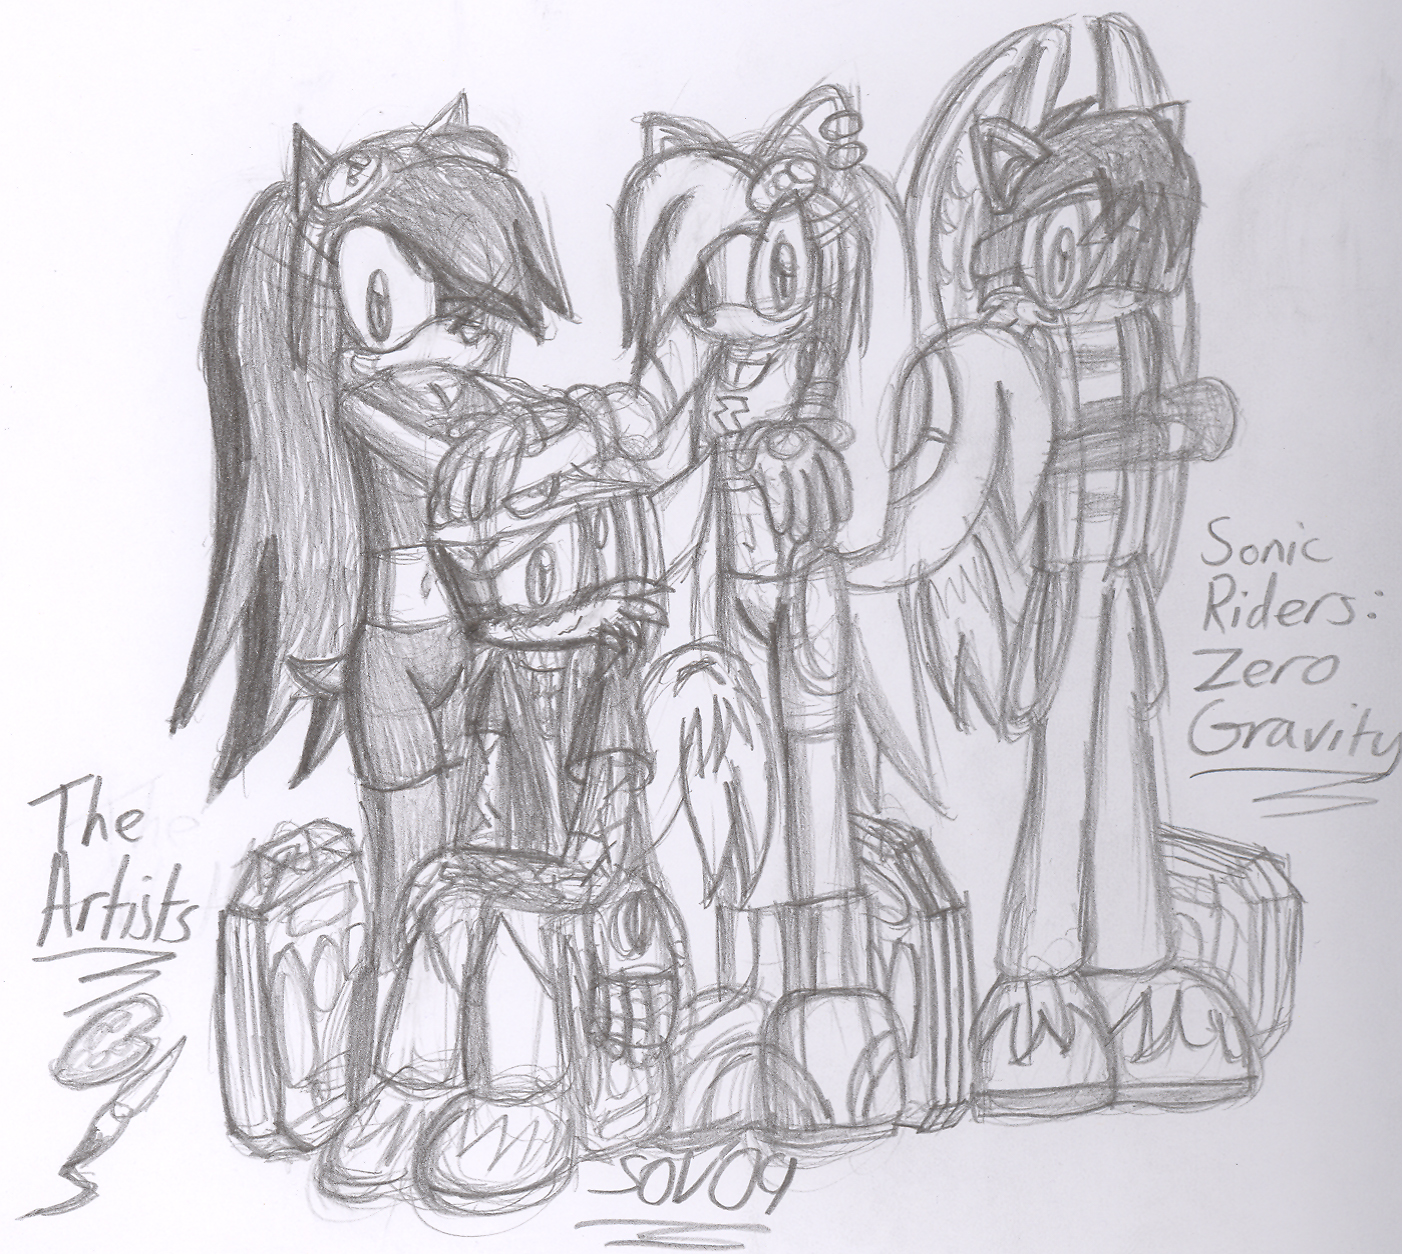 Sonic Riders:Zero Gravity-The Artists by shadowsofvoltage